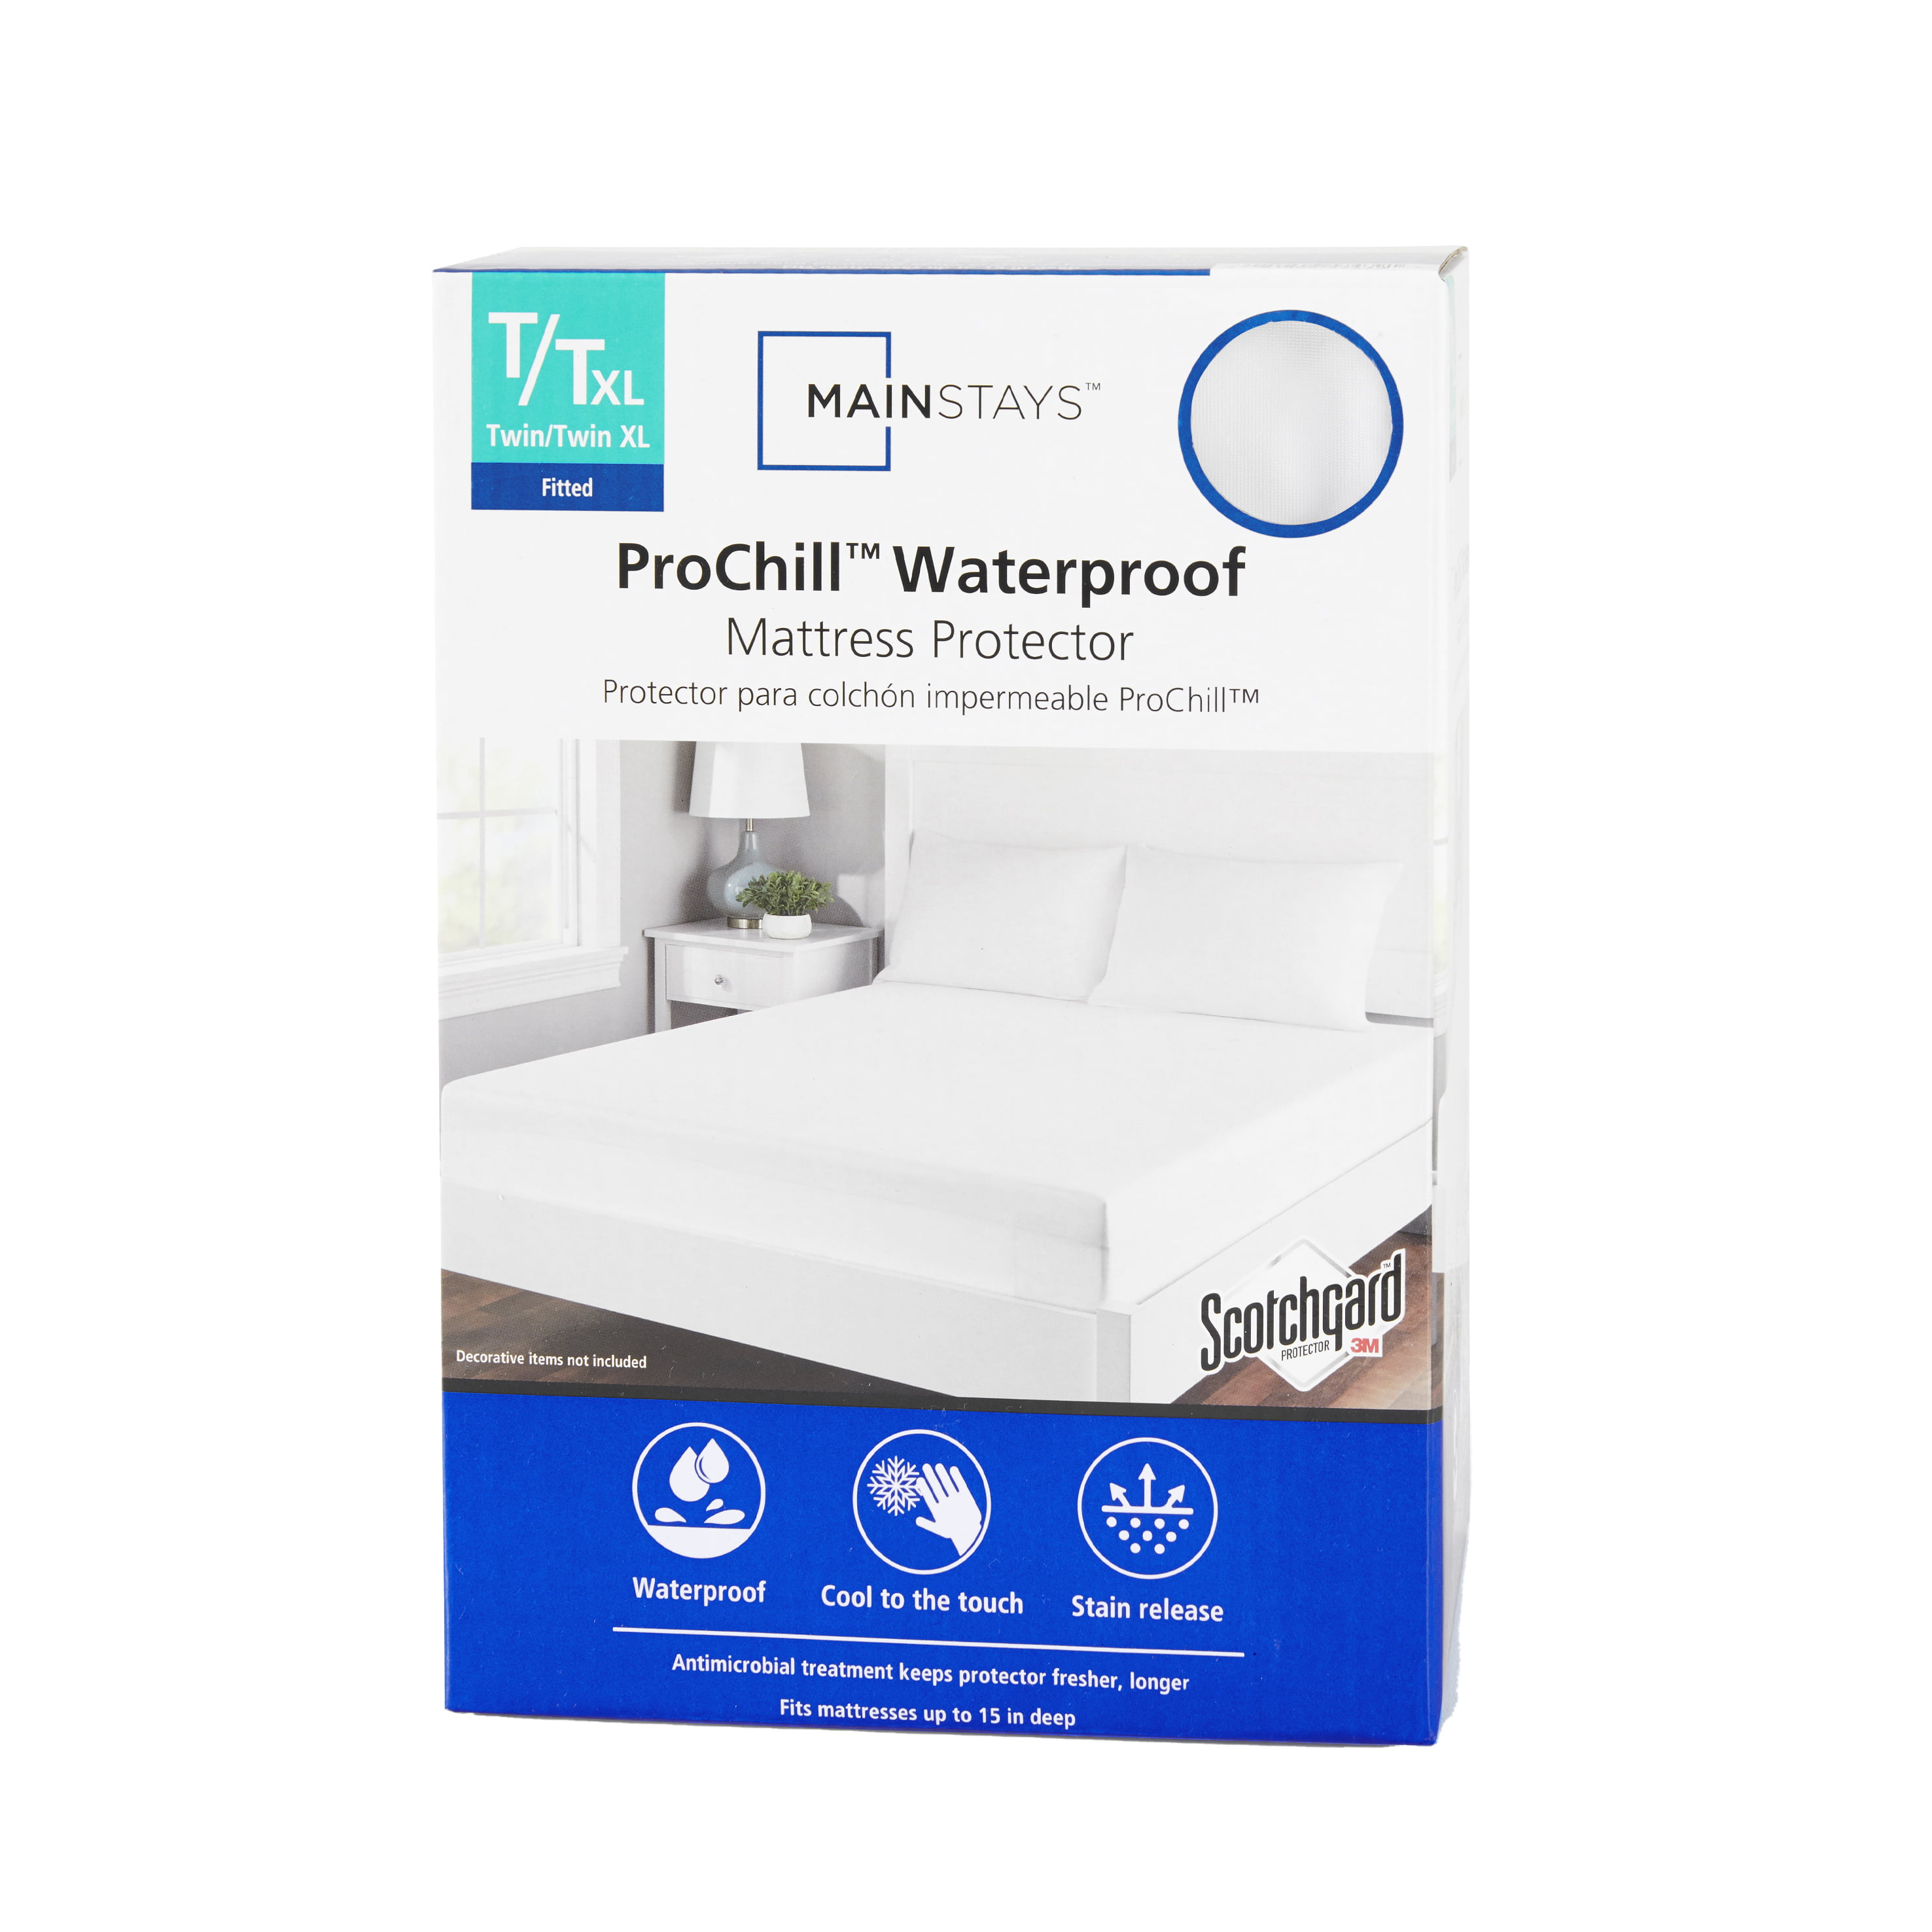 Mainstays ProChill Waterproof Cooling Fitted Mattress Protector (various sizes) from $12.50 + Free Store Pickup at Walmart